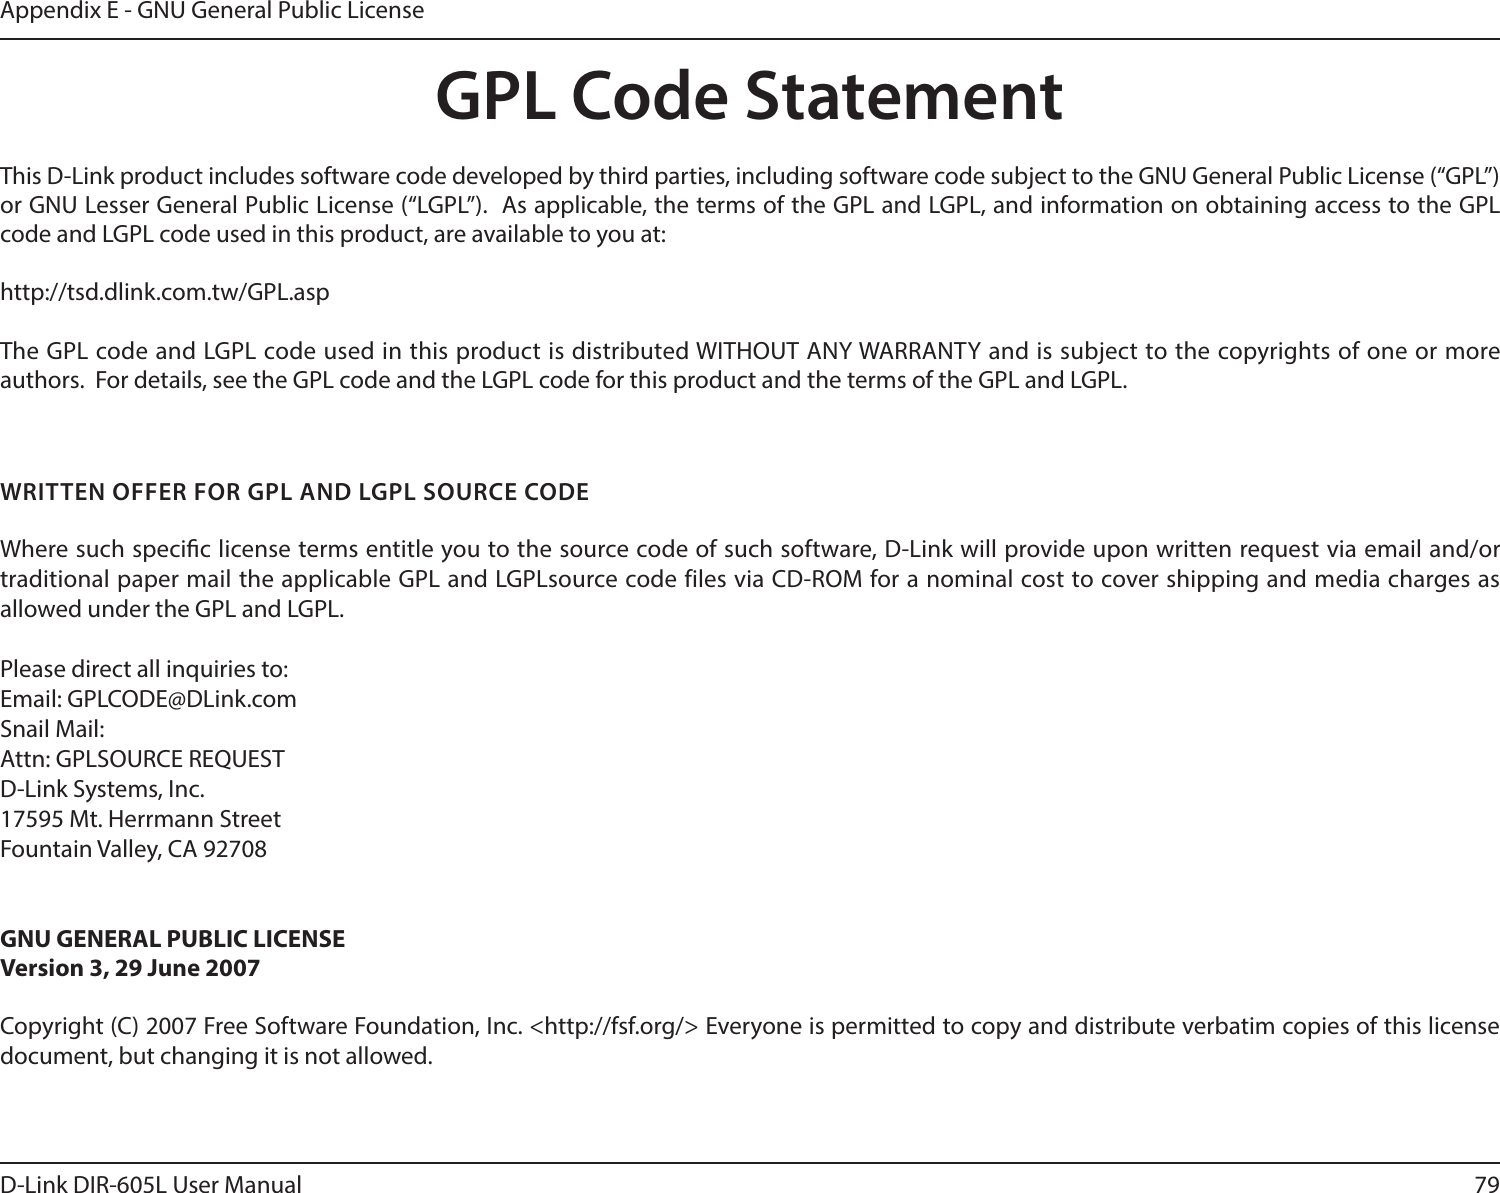 79D-Link DIR-605L User ManualAppendix E - GNU General Public LicenseGPL Code StatementThis D-Link product includes software code developed by third parties, including software code subject to the GNU General Public License (“GPL”) or GNU Lesser General Public License (“LGPL”).  As applicable, the terms of the GPL and LGPL, and information on obtaining access to the GPL code and LGPL code used in this product, are available to you at:http://tsd.dlink.com.tw/GPL.aspThe GPL code and LGPL code used in this product is distributed WITHOUT ANY WARRANTY and is subject to the copyrights of one or more authors.  For details, see the GPL code and the LGPL code for this product and the terms of the GPL and LGPL.WRITTEN OFFER FOR GPL AND LGPL SOURCE CODEWhere such specic license terms entitle you to the source code of such software, D-Link will provide upon written request via email and/or traditional paper mail the applicable GPL and LGPLsource code files via CD-ROM for a nominal cost to cover shipping and media charges as allowed under the GPL and LGPL.  Please direct all inquiries to:Email: GPLCODE@DLink.comSnail Mail:Attn: GPLSOURCE REQUESTD-Link Systems, Inc.17595 Mt. Herrmann StreetFountain Valley, CA 92708GNU GENERAL PUBLIC LICENSEVersion 3, 29 June 2007Copyright (C) 2007 Free Software Foundation, Inc. &lt;http://fsf.org/&gt; Everyone is permitted to copy and distribute verbatim copies of this license document, but changing it is not allowed.